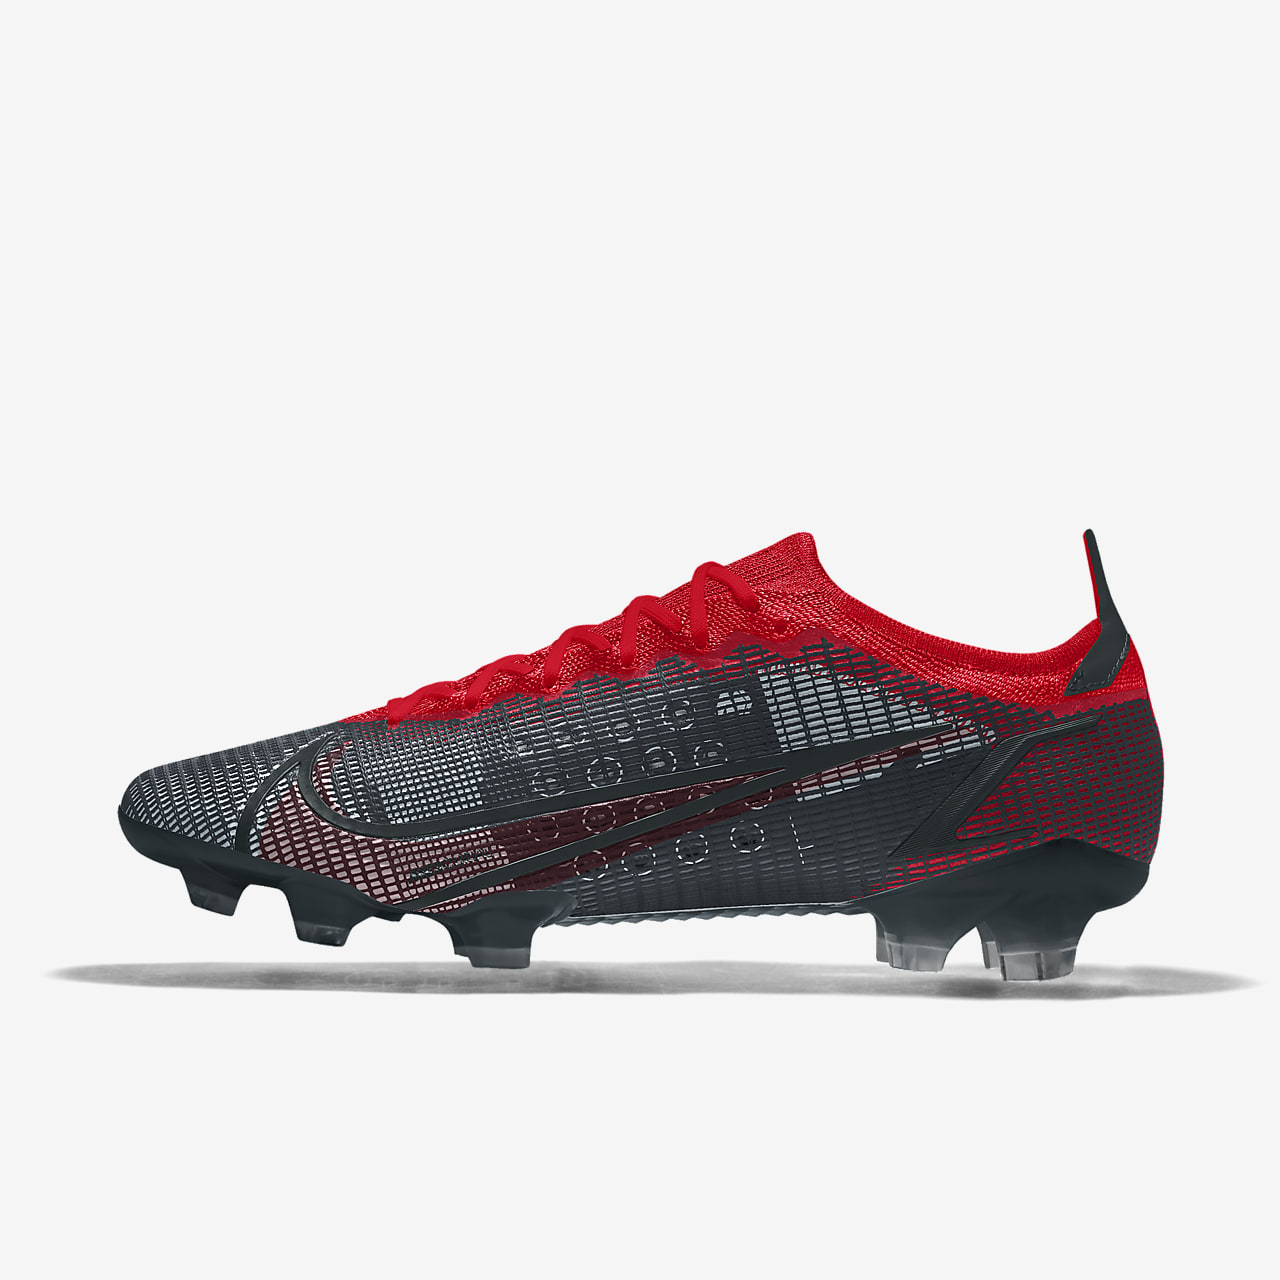 nike football boots create your own